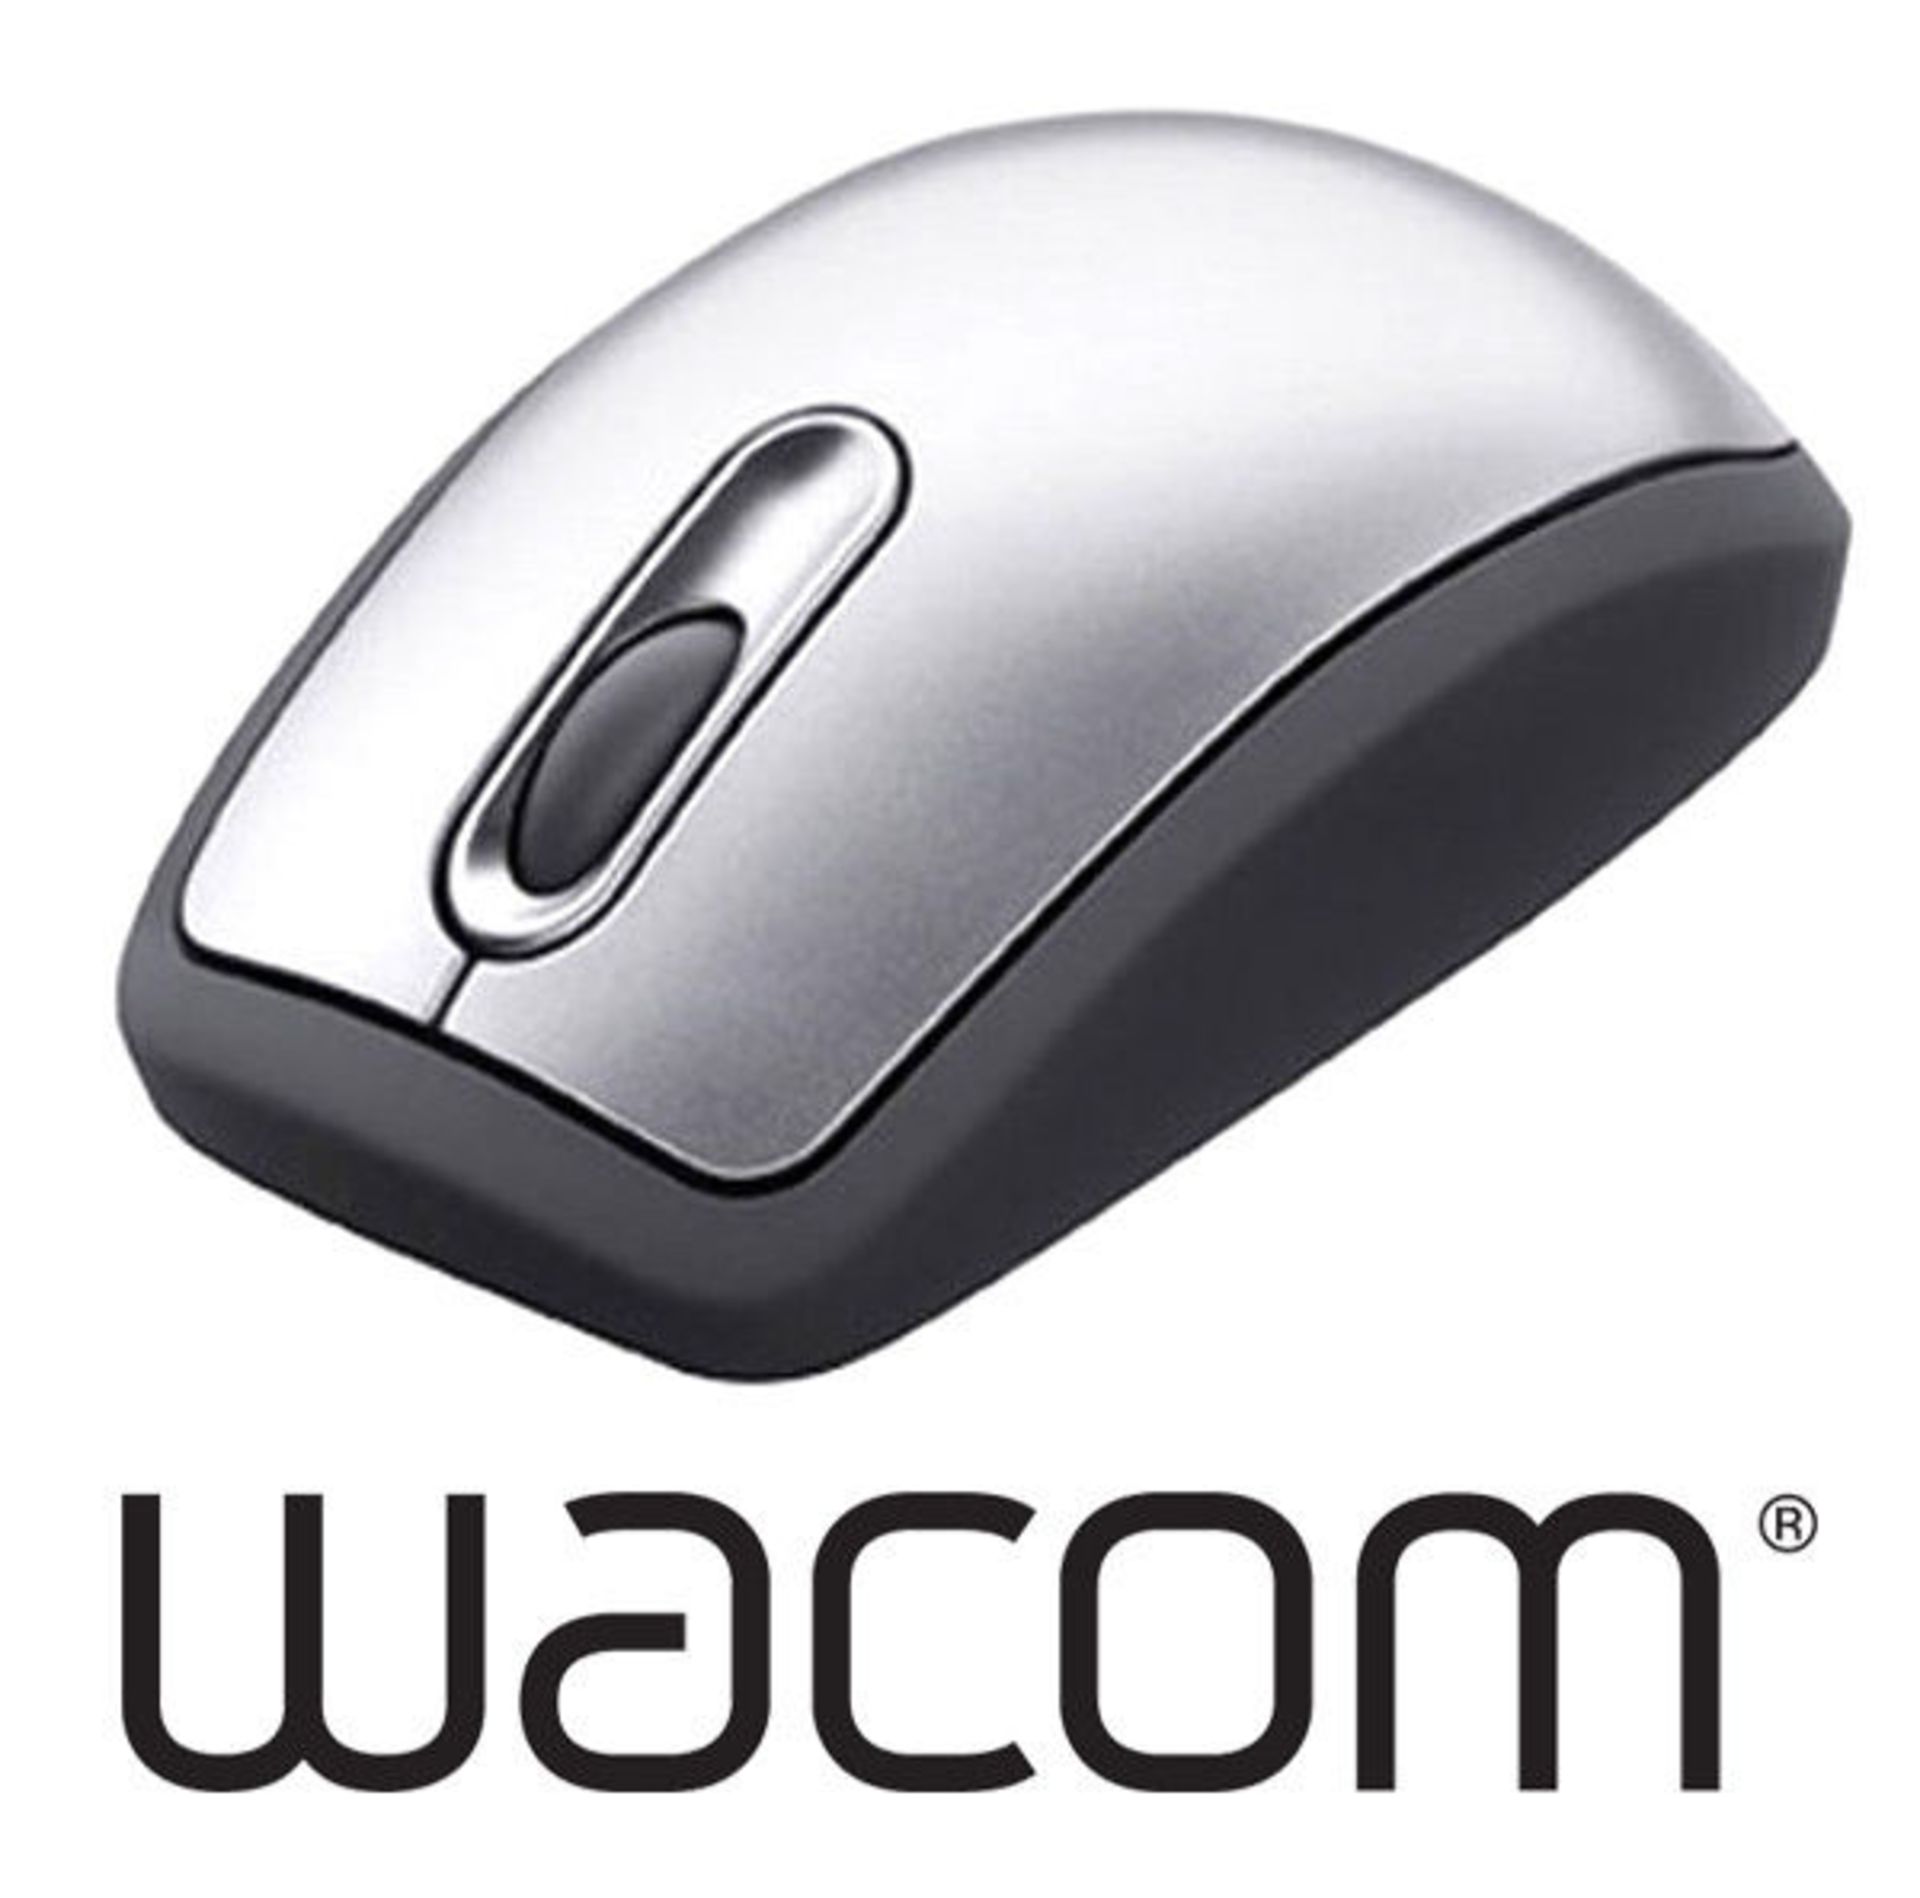 Brand New Wacom Graphire 4 Cordless Compuer Mouse